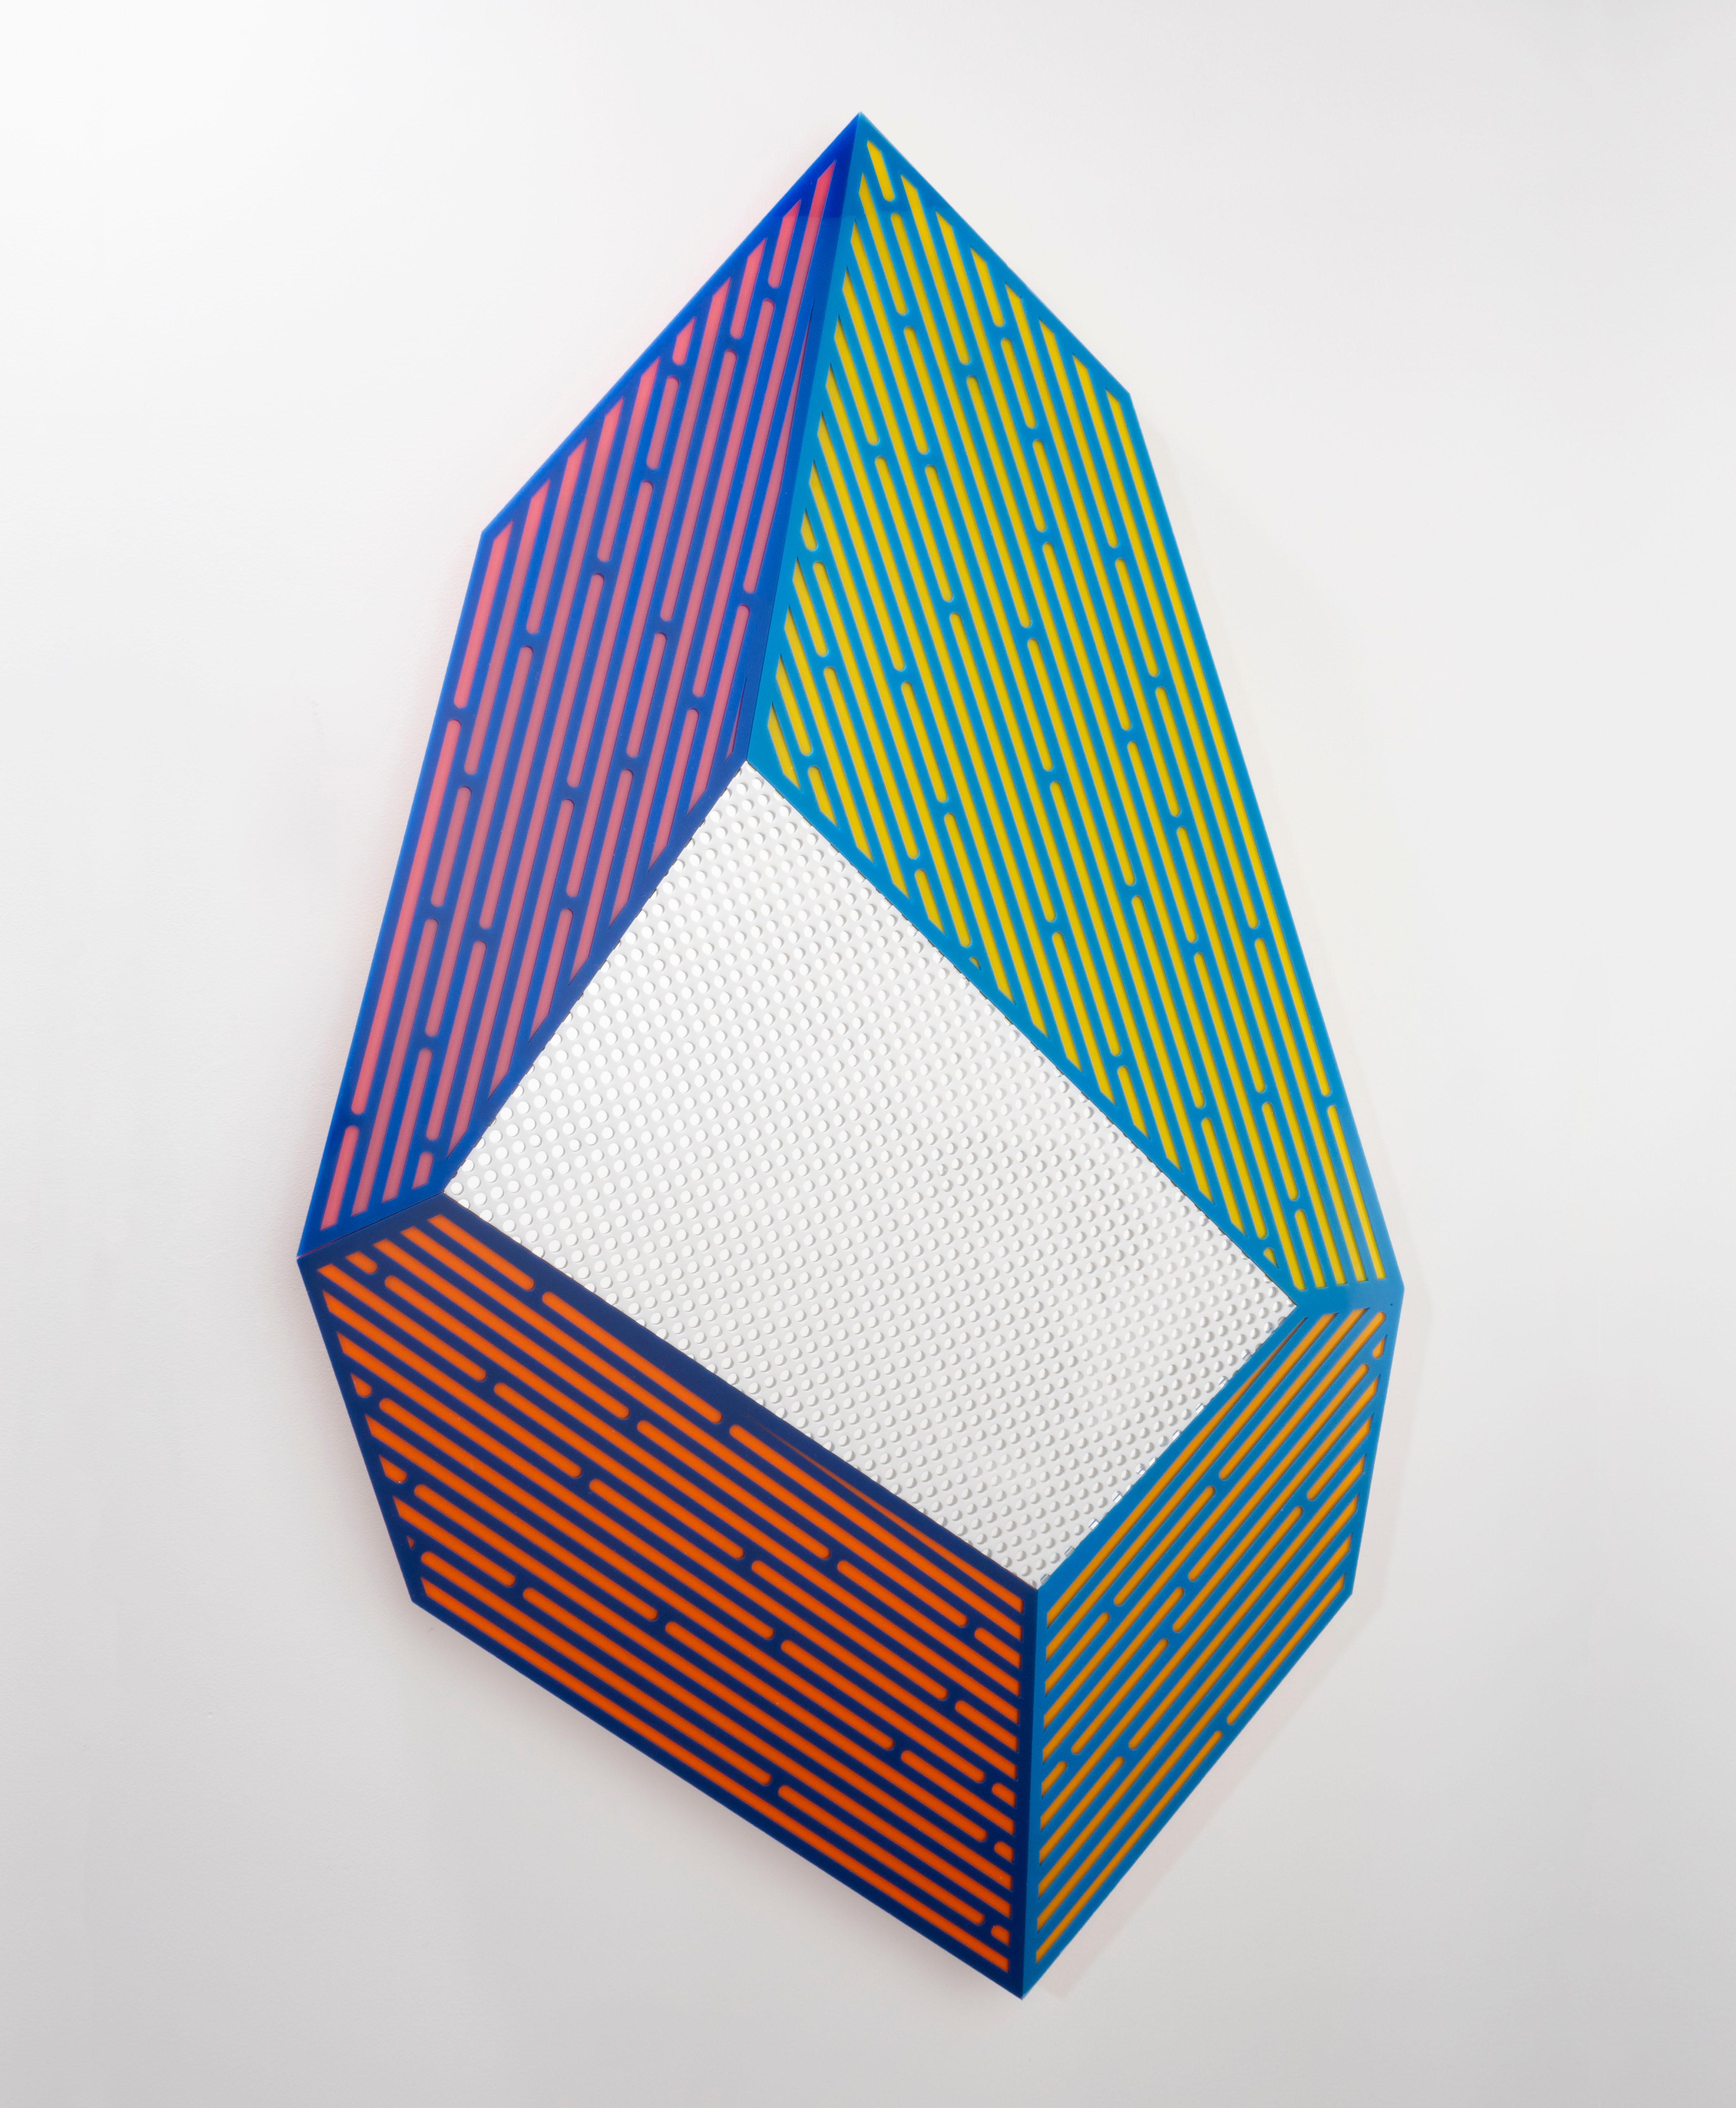 Jay Walker Figurative Sculpture - Prismatic Polygon V: geometric abstract wall-mounted sculpture in red green blue